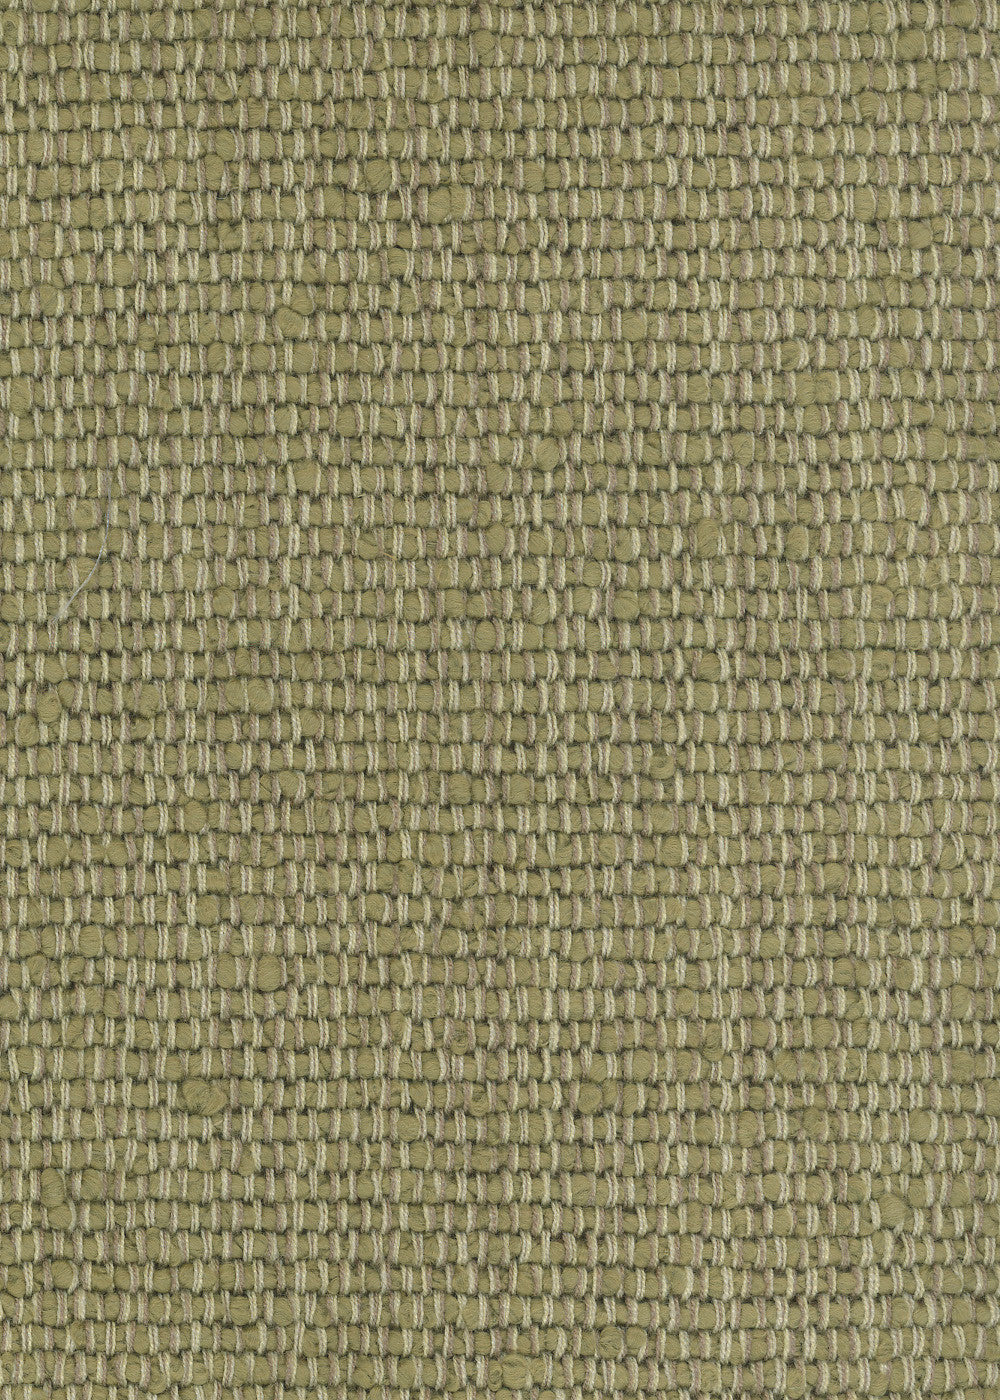 sisal fabric, sisal fabric Suppliers and Manufacturers at